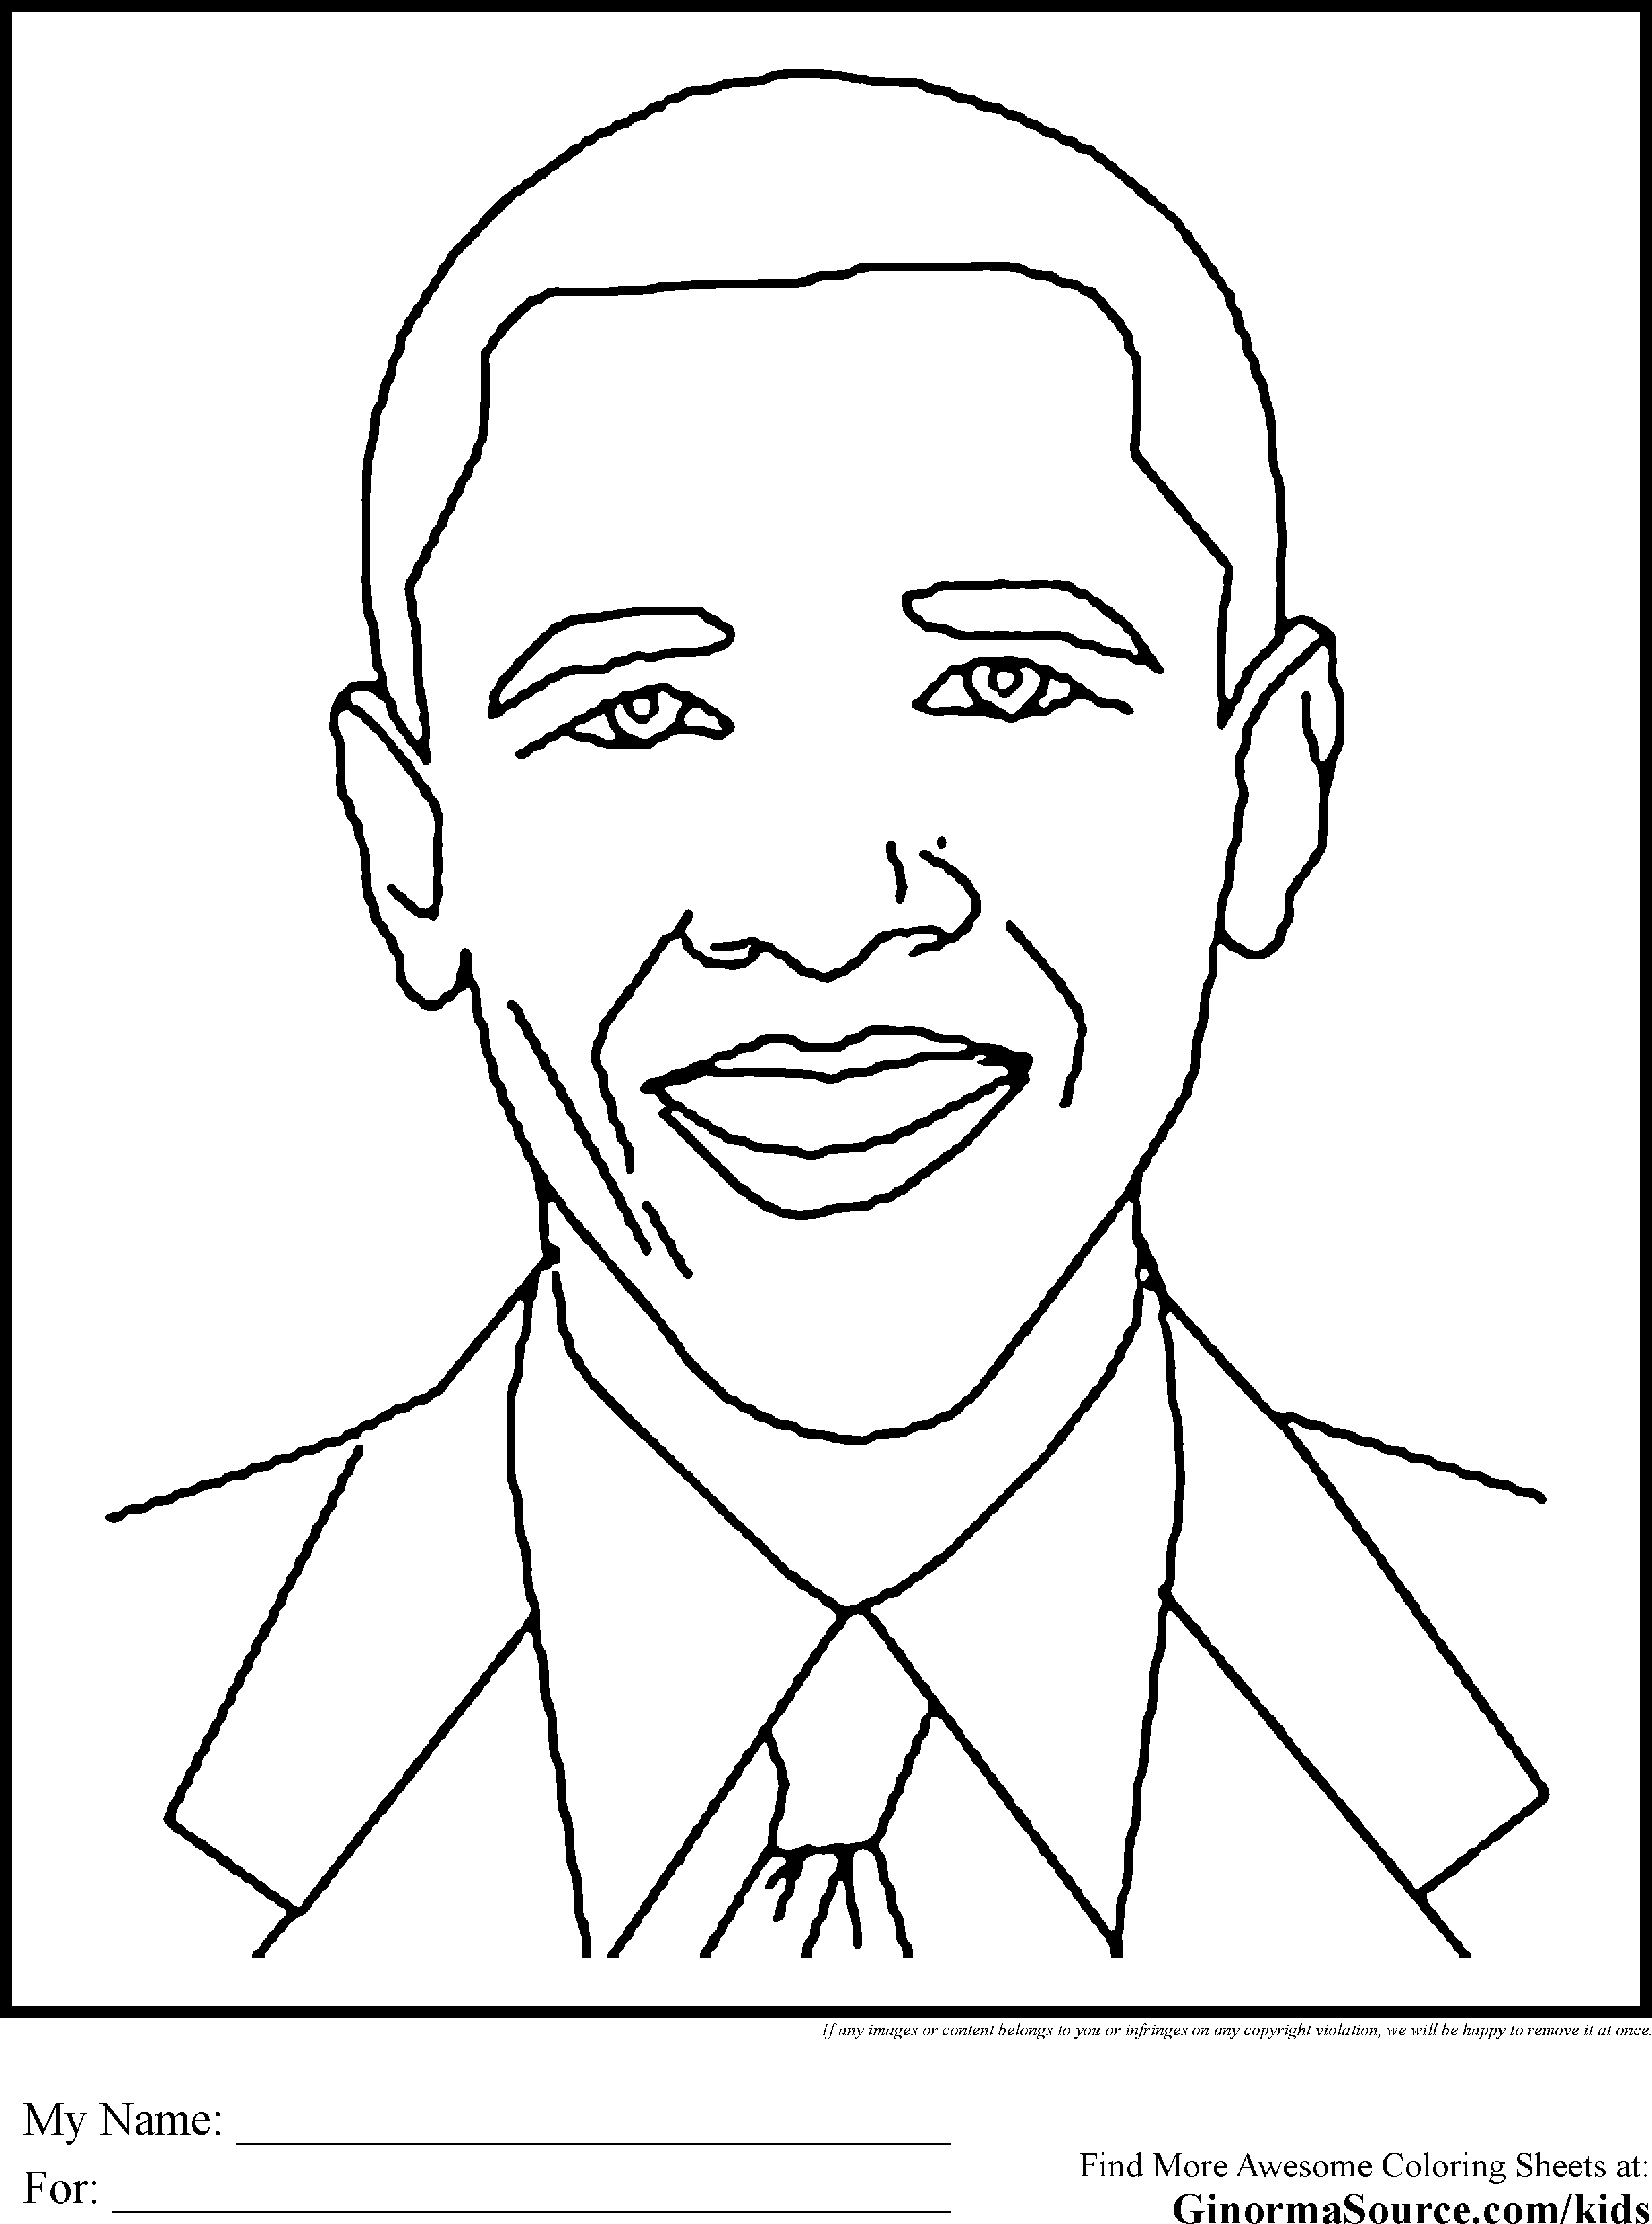 history coloring pages black history coloring pages obama education black history pages coloring 